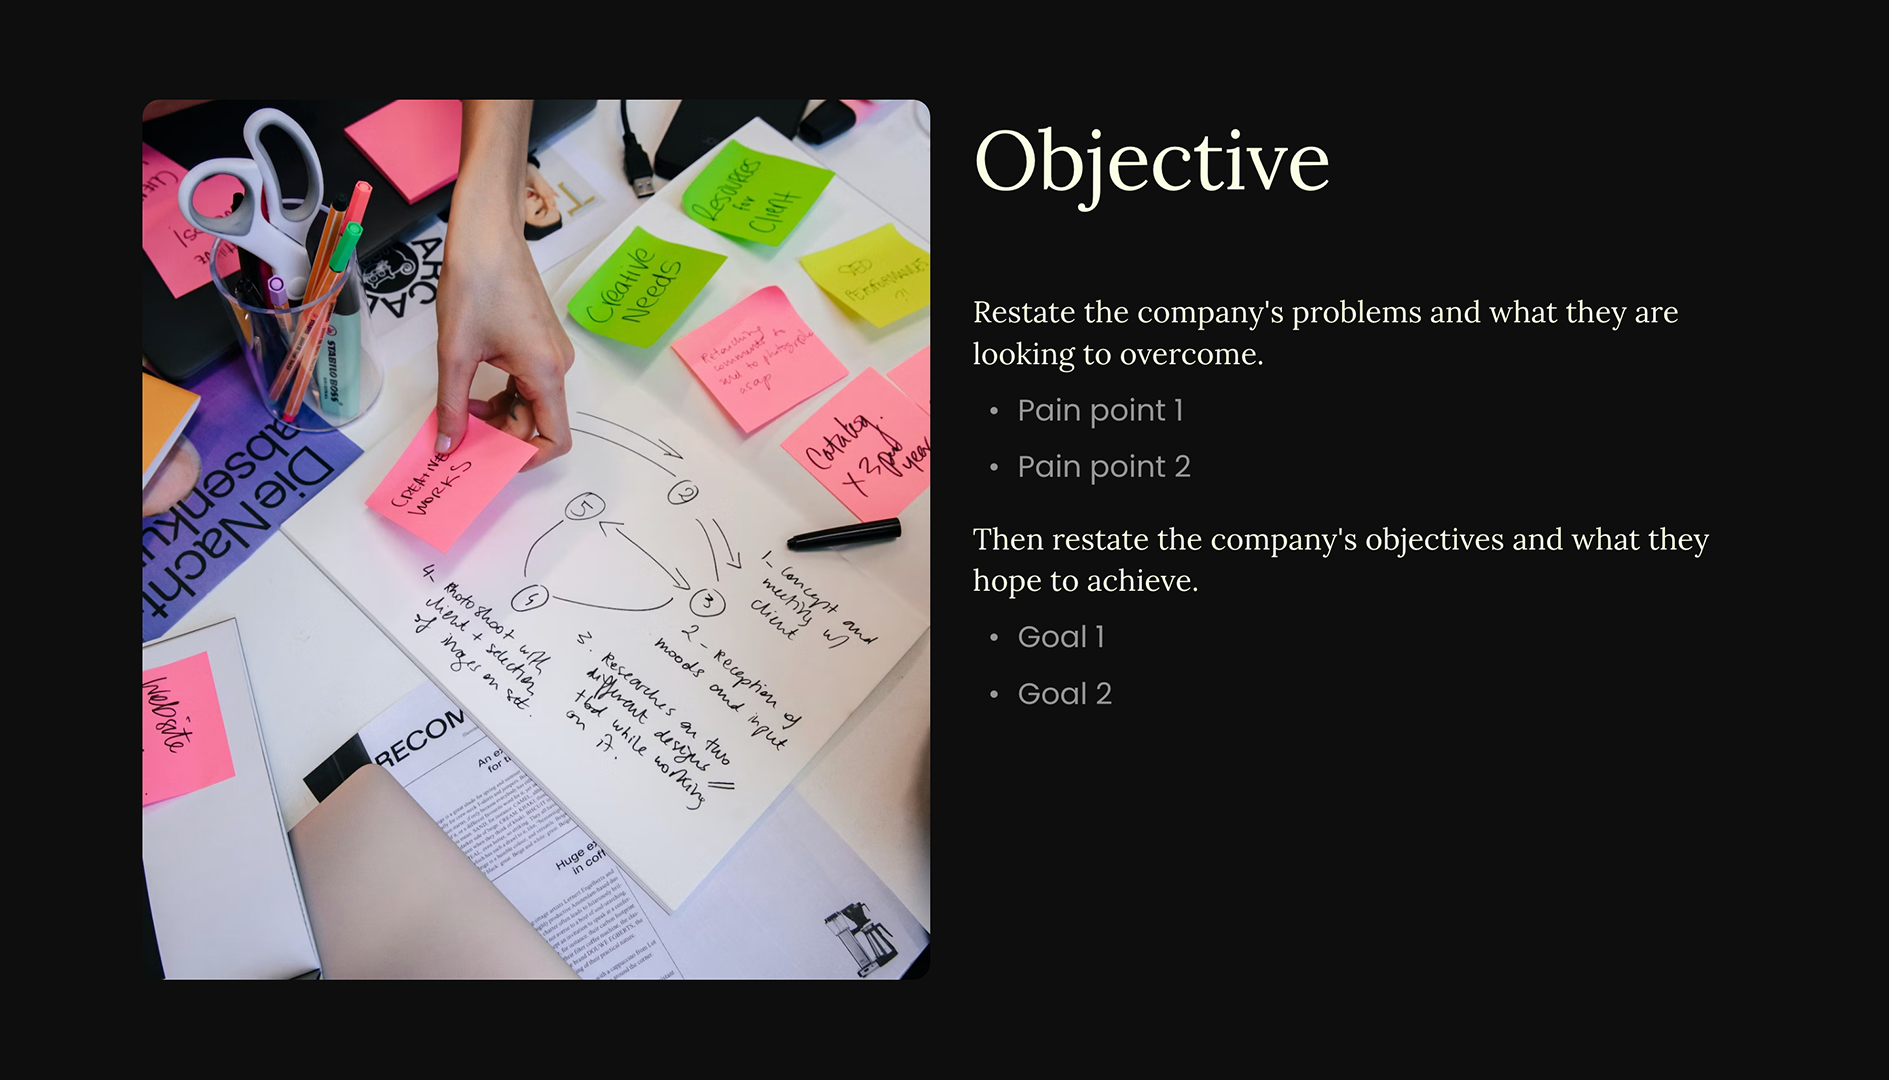 Services Consulting Sales Pitch - Objective